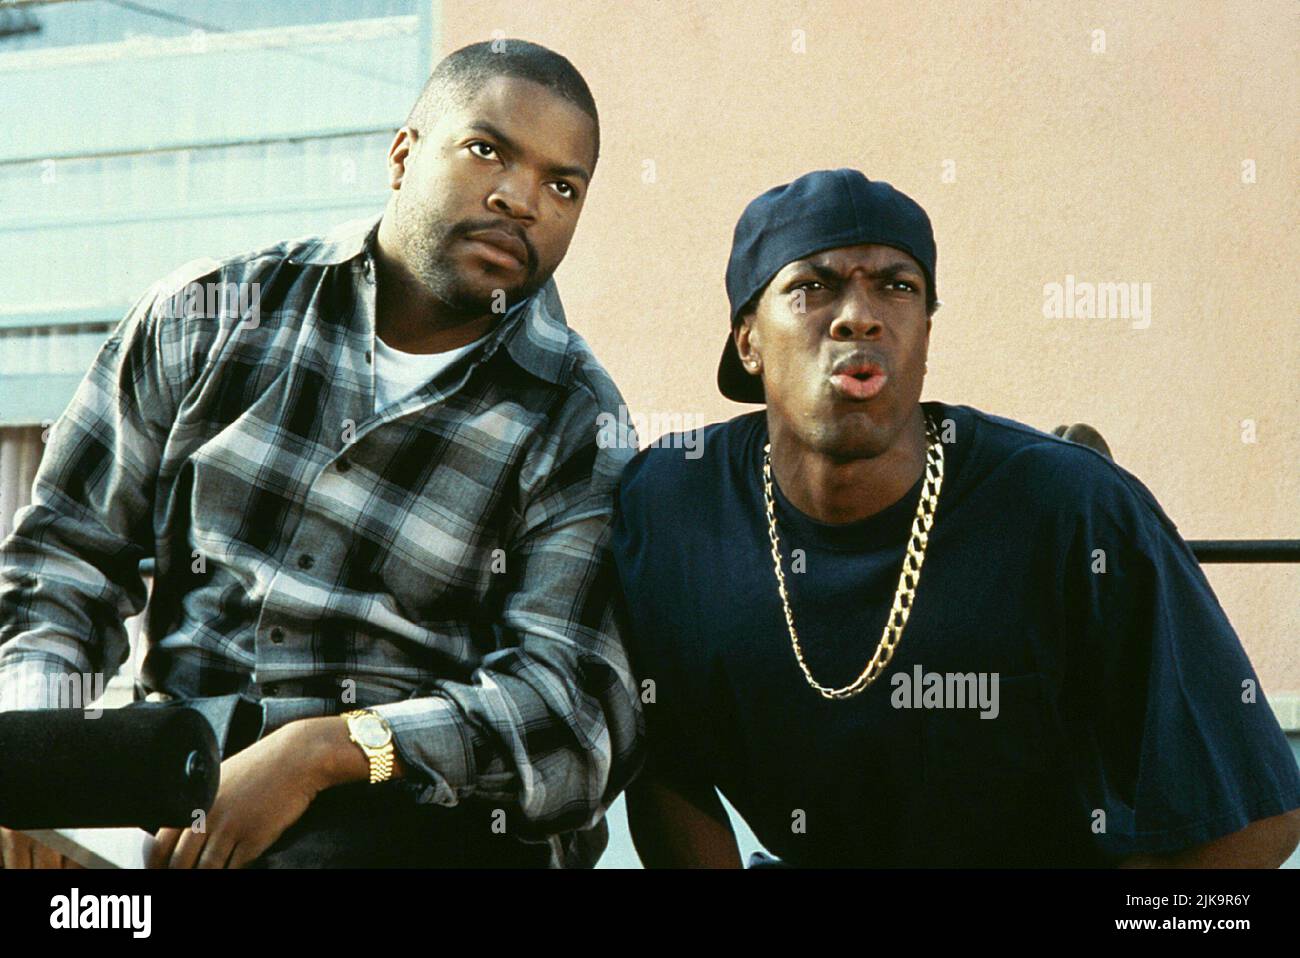 Friday': Ice Cube's 1995 Comedy Was Filmed in Only 20 Days